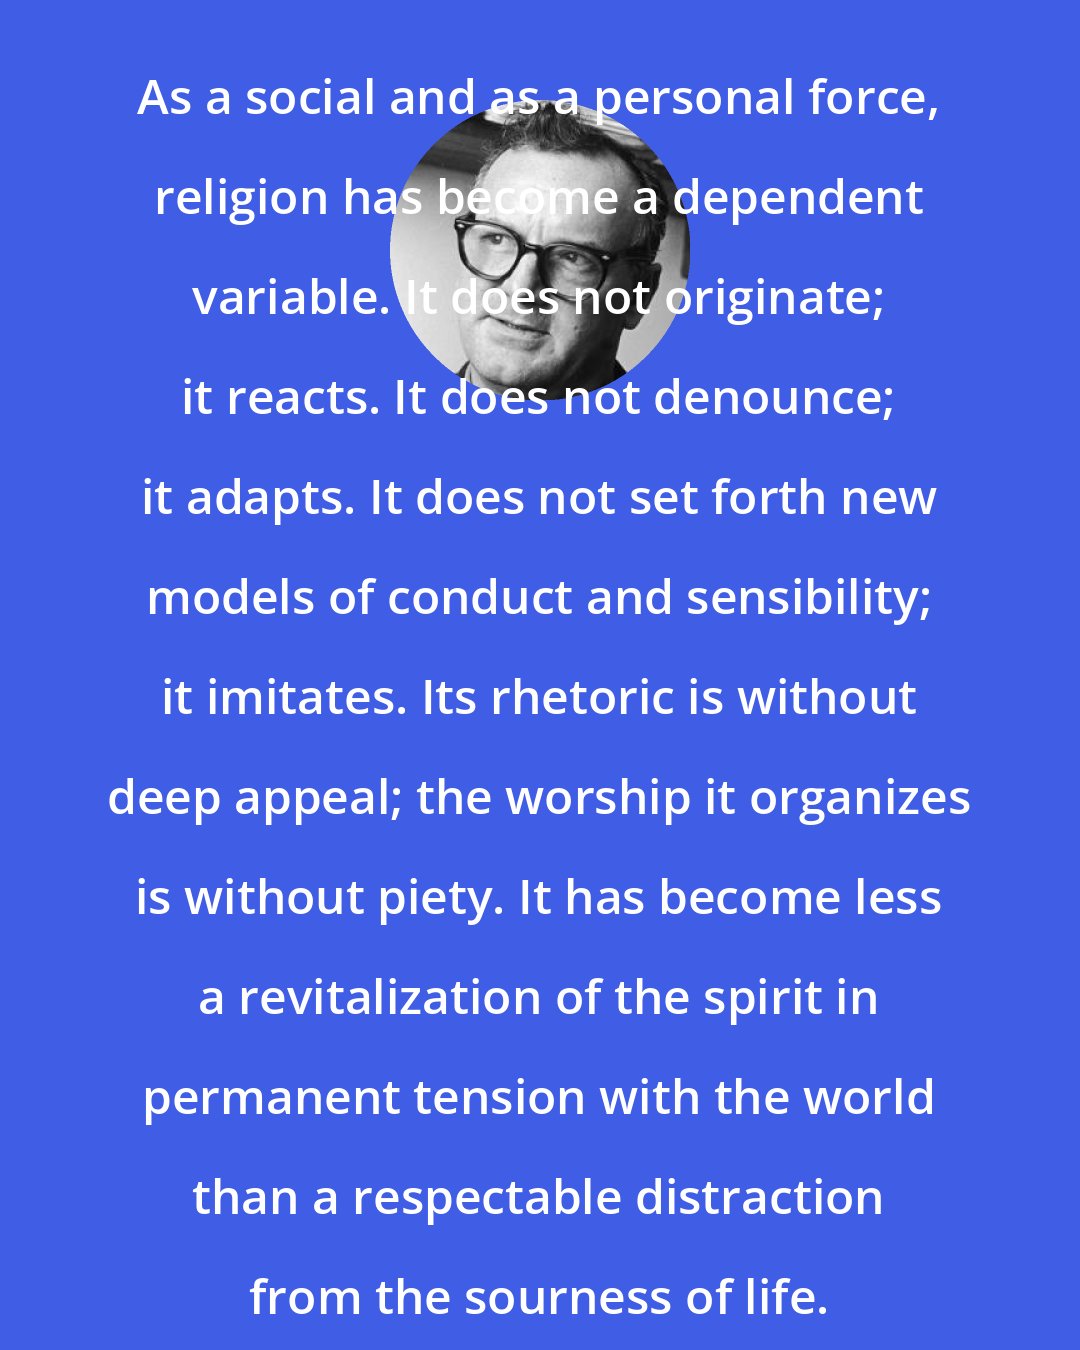 C. Wright Mills: As a social and as a personal force, religion has become a dependent variable. It does not originate; it reacts. It does not denounce; it adapts. It does not set forth new models of conduct and sensibility; it imitates. Its rhetoric is without deep appeal; the worship it organizes is without piety. It has become less a revitalization of the spirit in permanent tension with the world than a respectable distraction from the sourness of life.